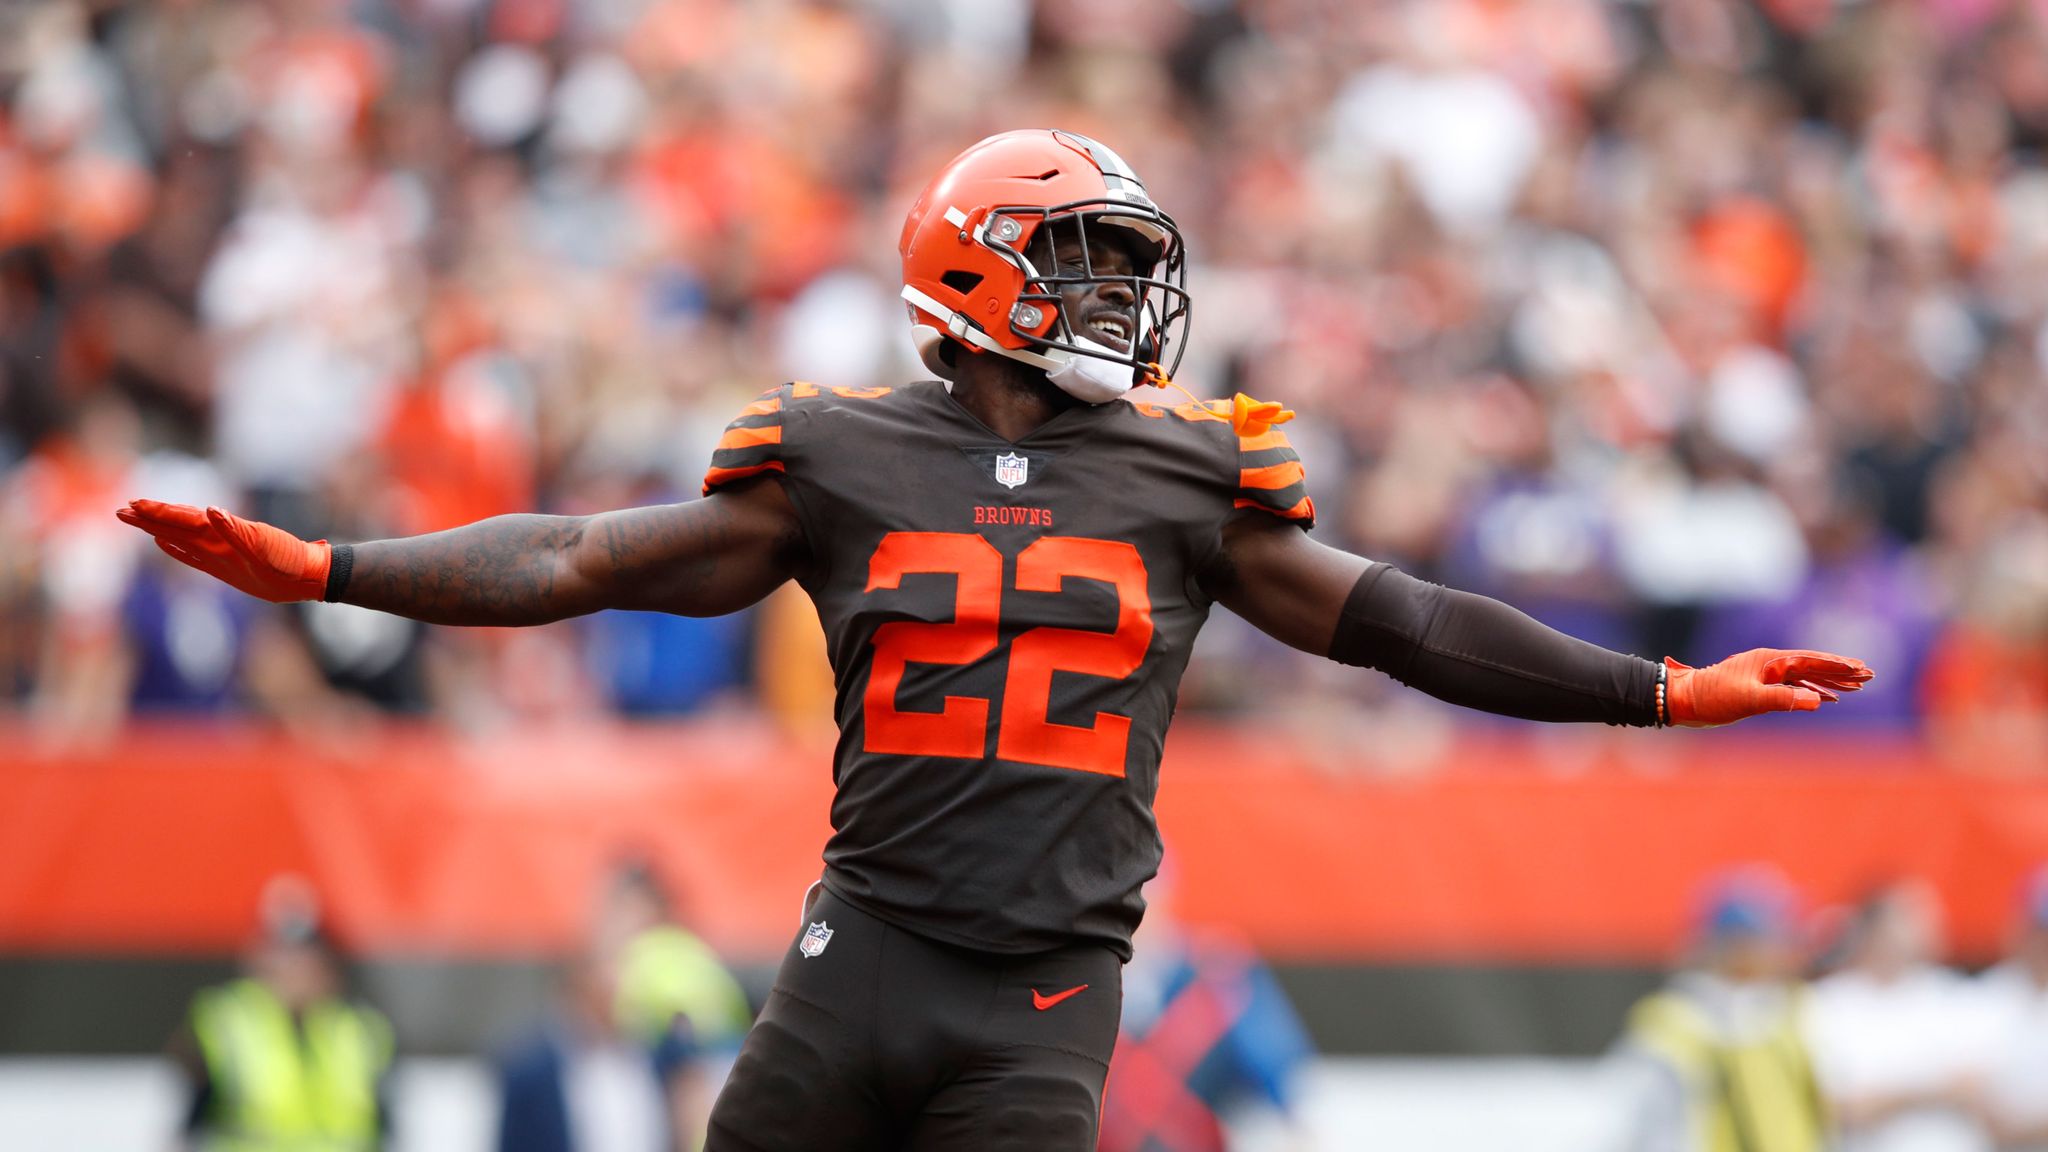 Isaiah Crowell's TD celebration sets Twitter off in NY Jets vs. Browns